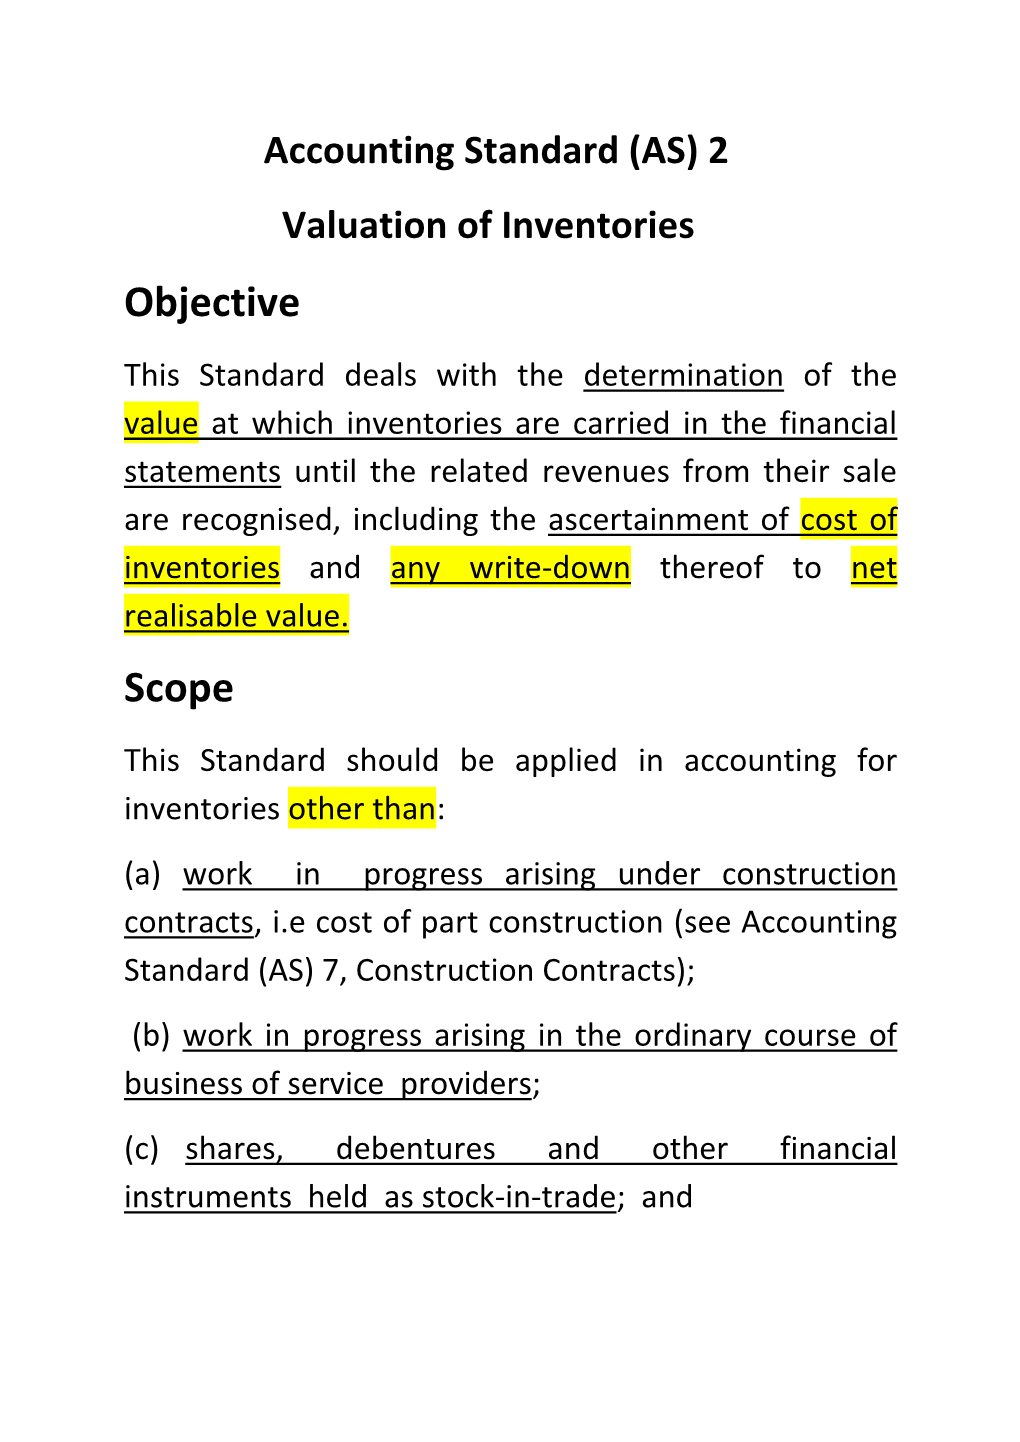 Accounting Standard (AS) 2 Valuation of Inventories